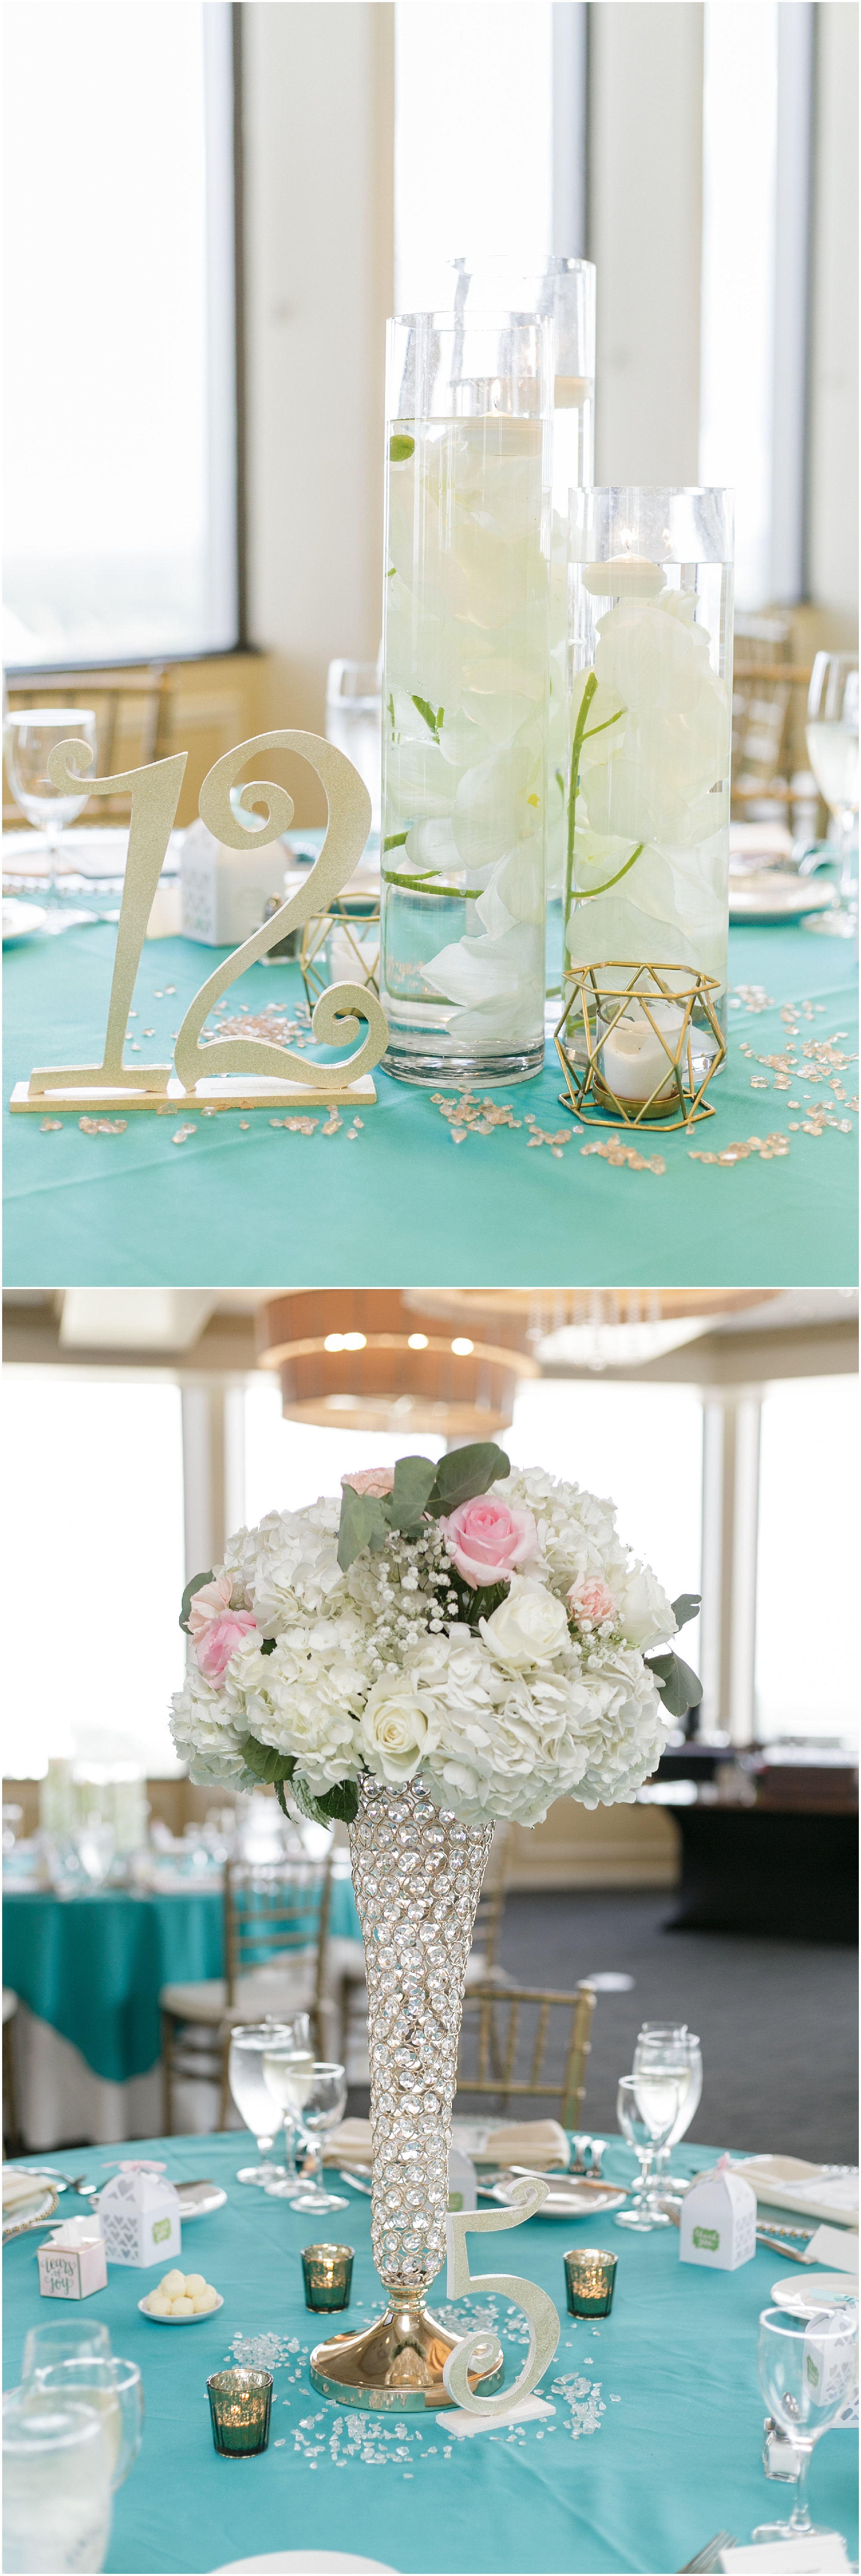 Centerpieces of white flowers and gold accents. 